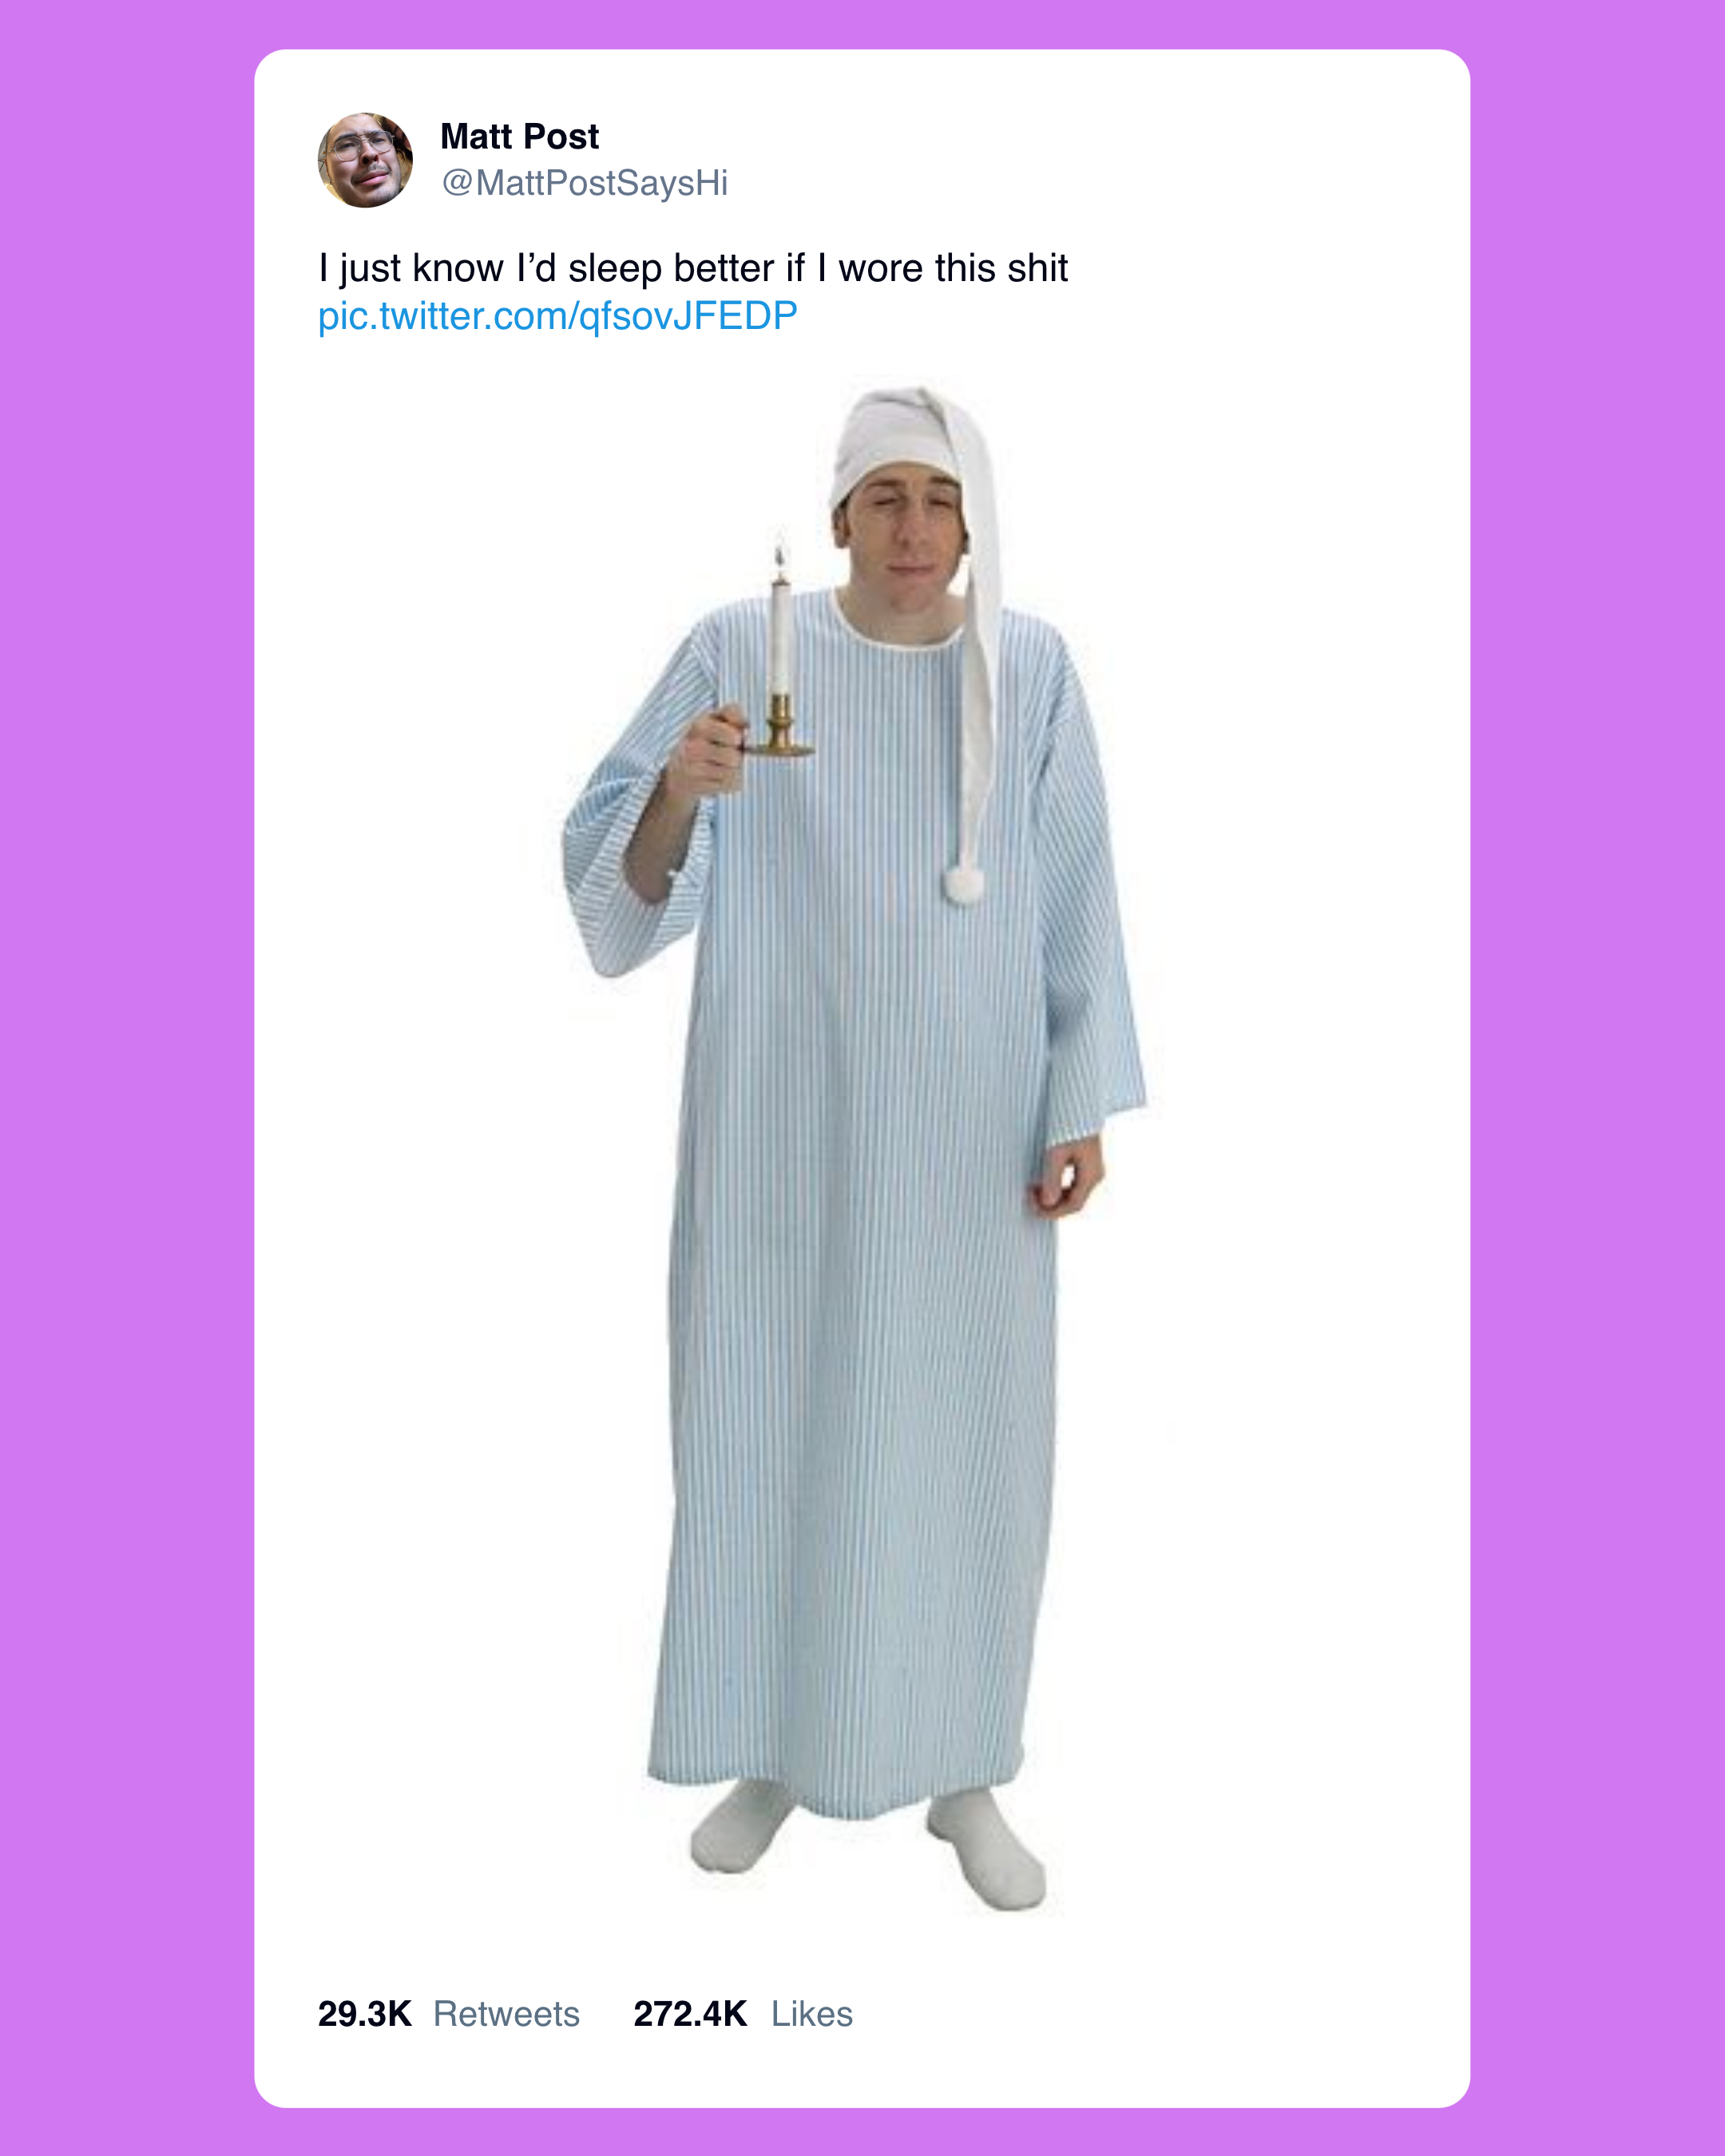 @MattPostSaysHi on Twitter: "I just know I'd sleep better if I wore this shit," image of man in sleeping gown, droopy hat, and socks carrying a candle on a metal plate.